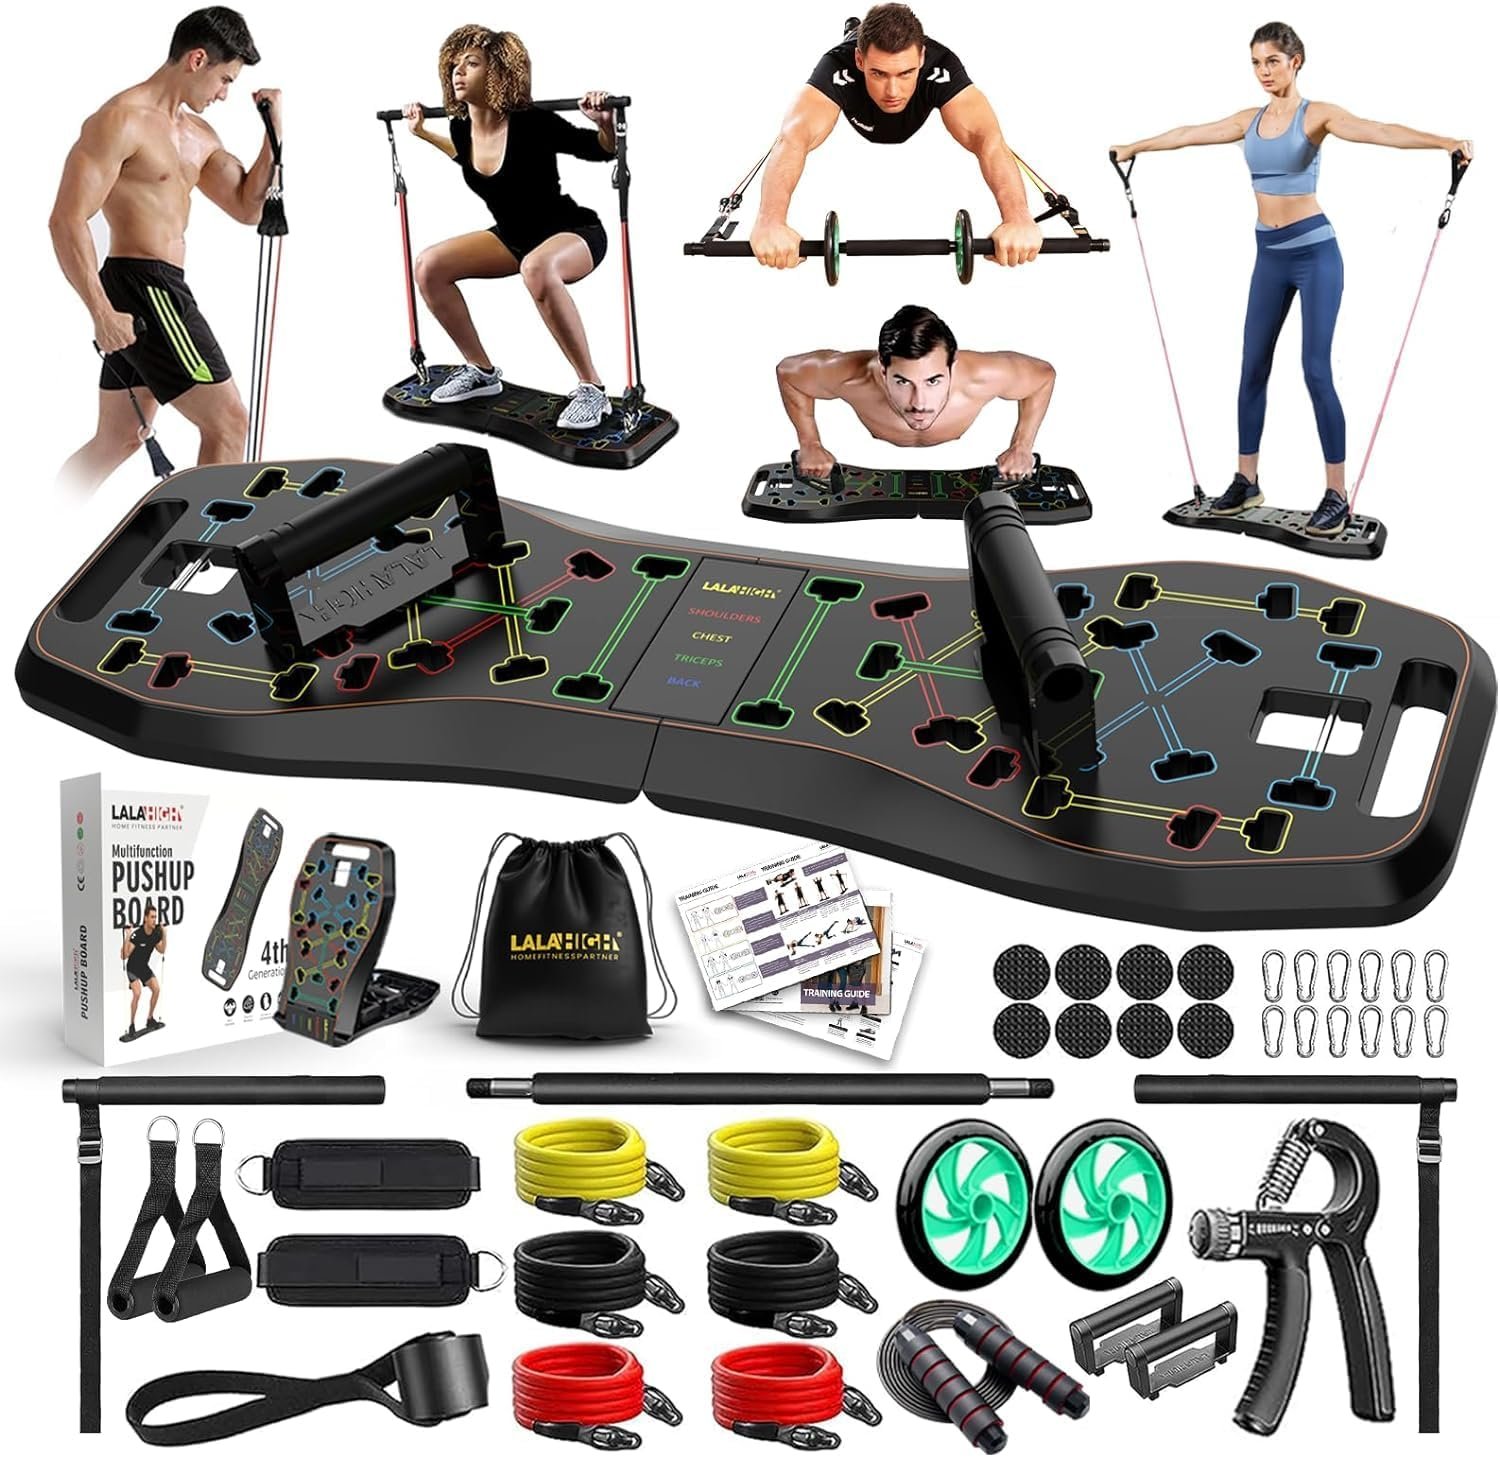 LALAHIGH Portable Home Gym System Review